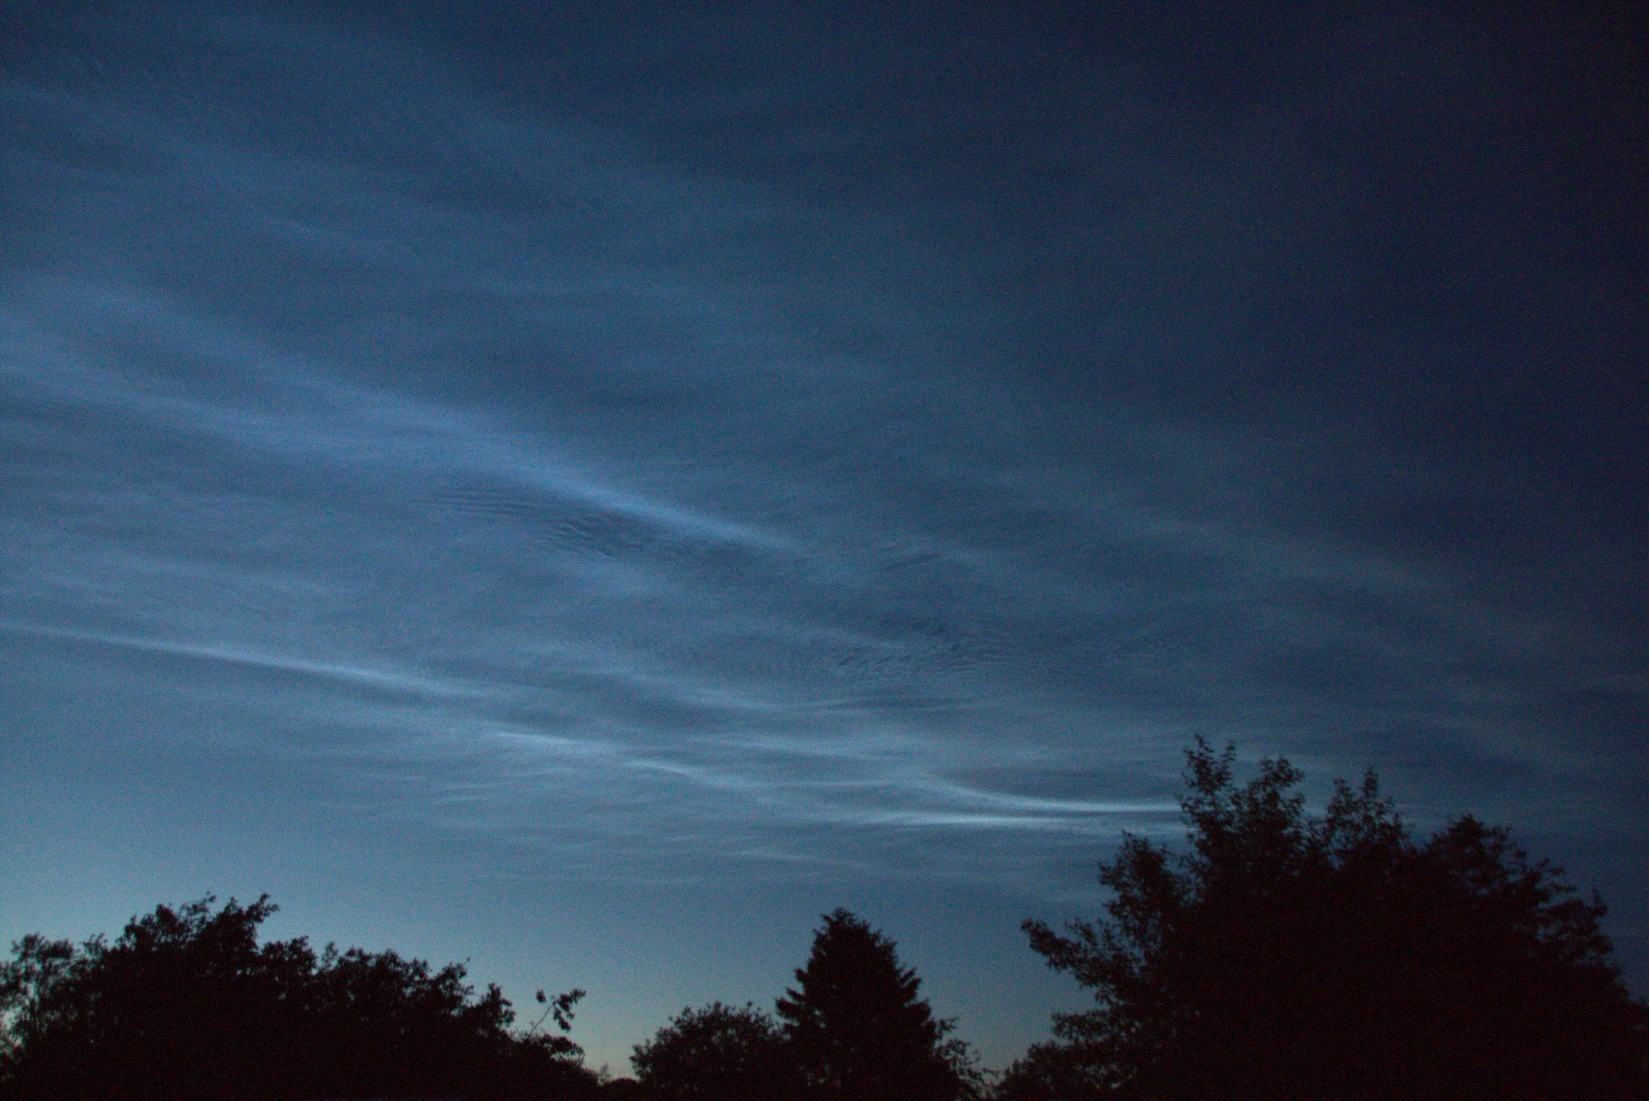 21/06/19 23:42pm.  NLC from Jim barber, first of four.